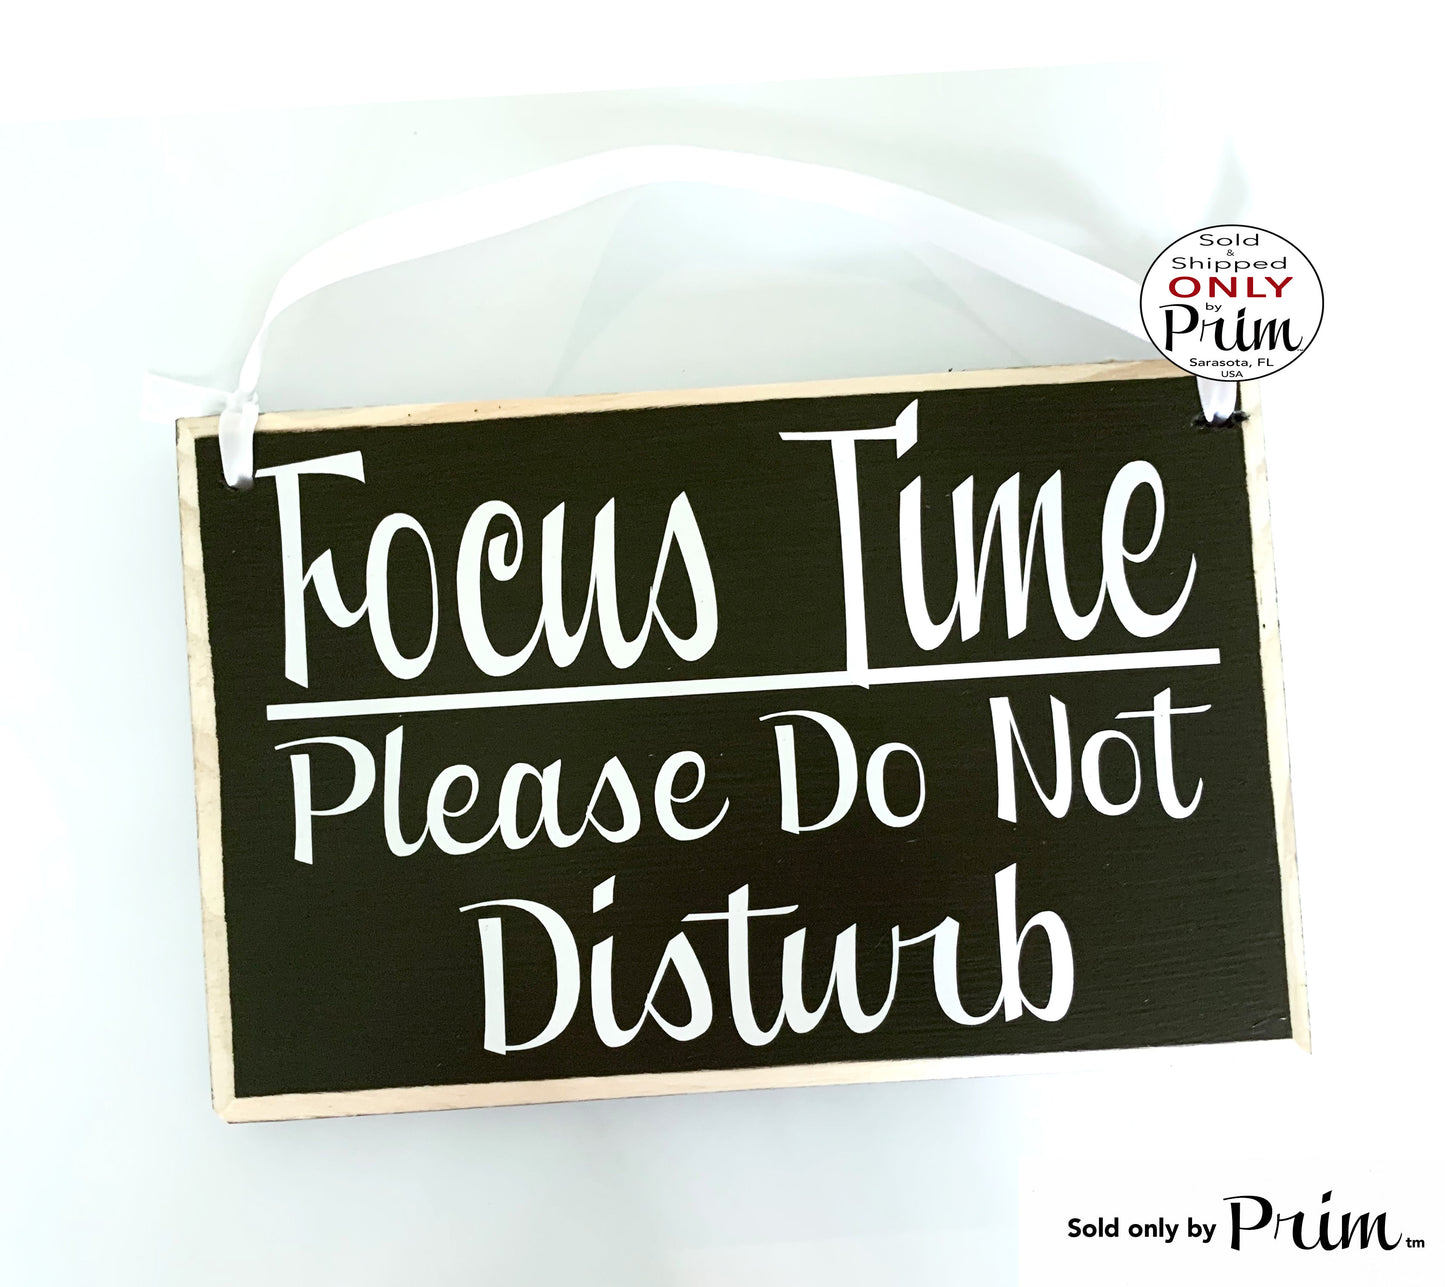 Designs by Prim 8x6 Focus Time Please Do Not Disturb Custom Wood Sign Workk Virtual Meetings Progress Home Office Working From Home Busy Session Door Plaque